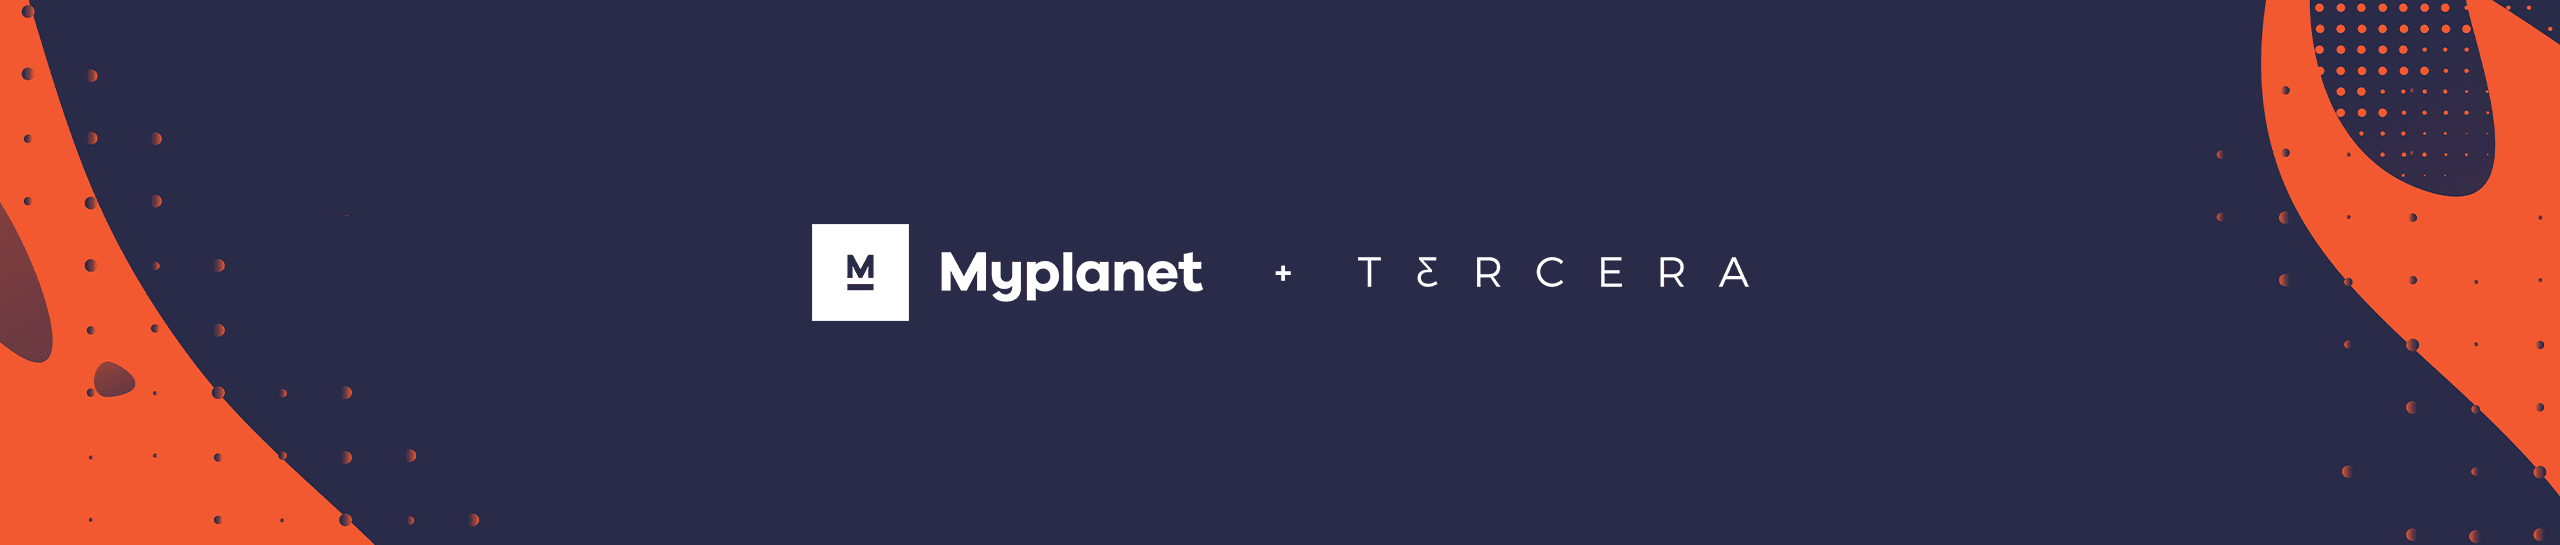 Myplanet logo and a Tercera logo on a navy blue and orange background.